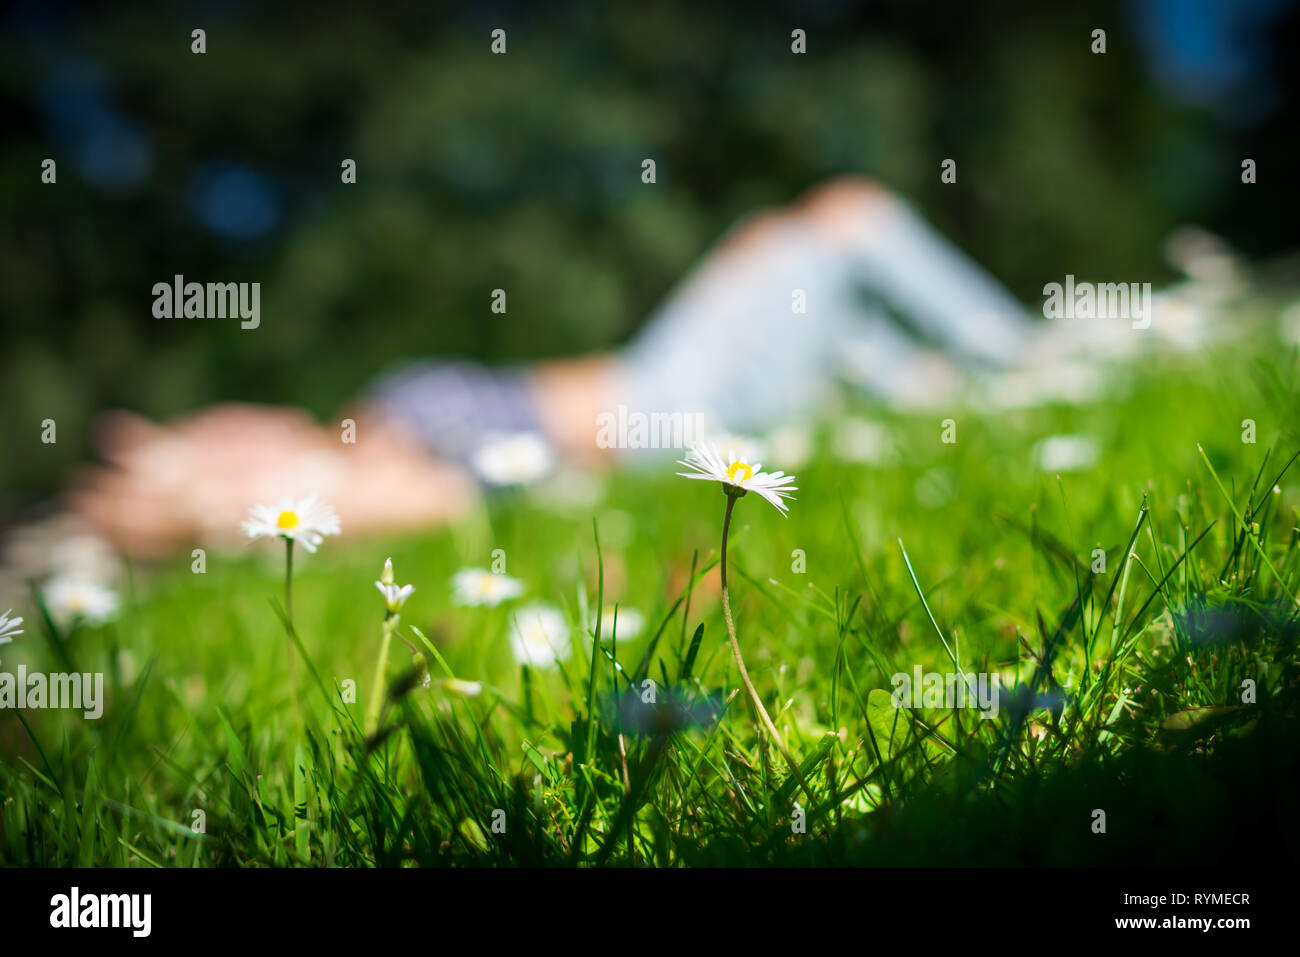 Chamomile flowers on green field in warm summer day on foreground. Young woman lying on the grass and big trees on blurred background. Stock Photo